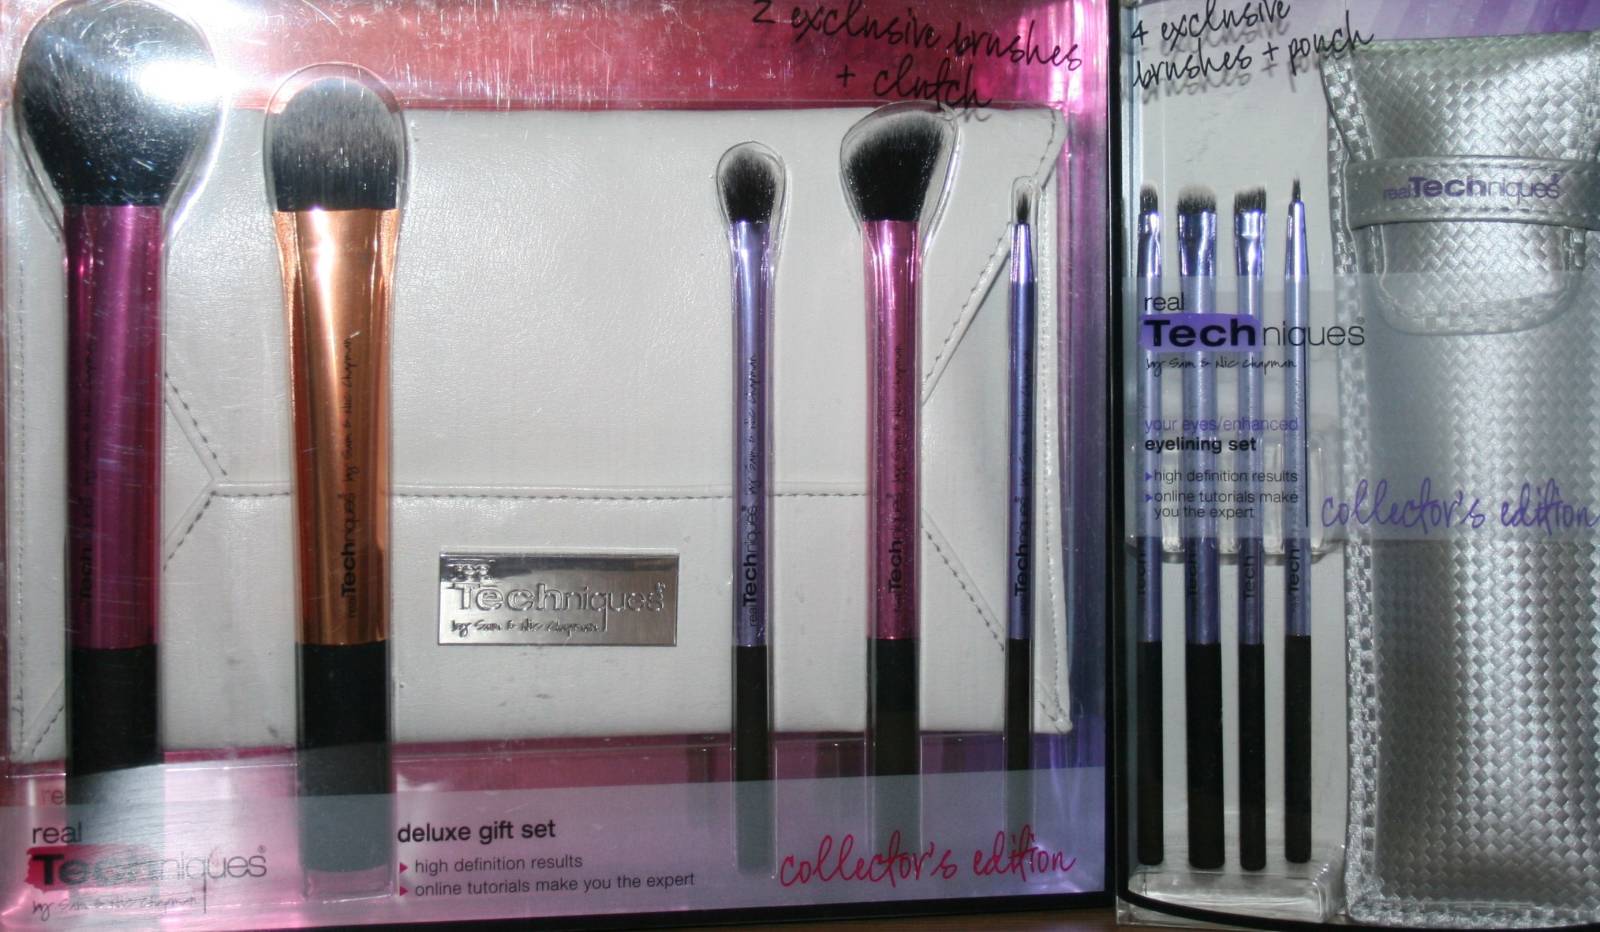 Real Techniques Collector’s Edition Sets: Eyelining Set and Deluxe Gift Set